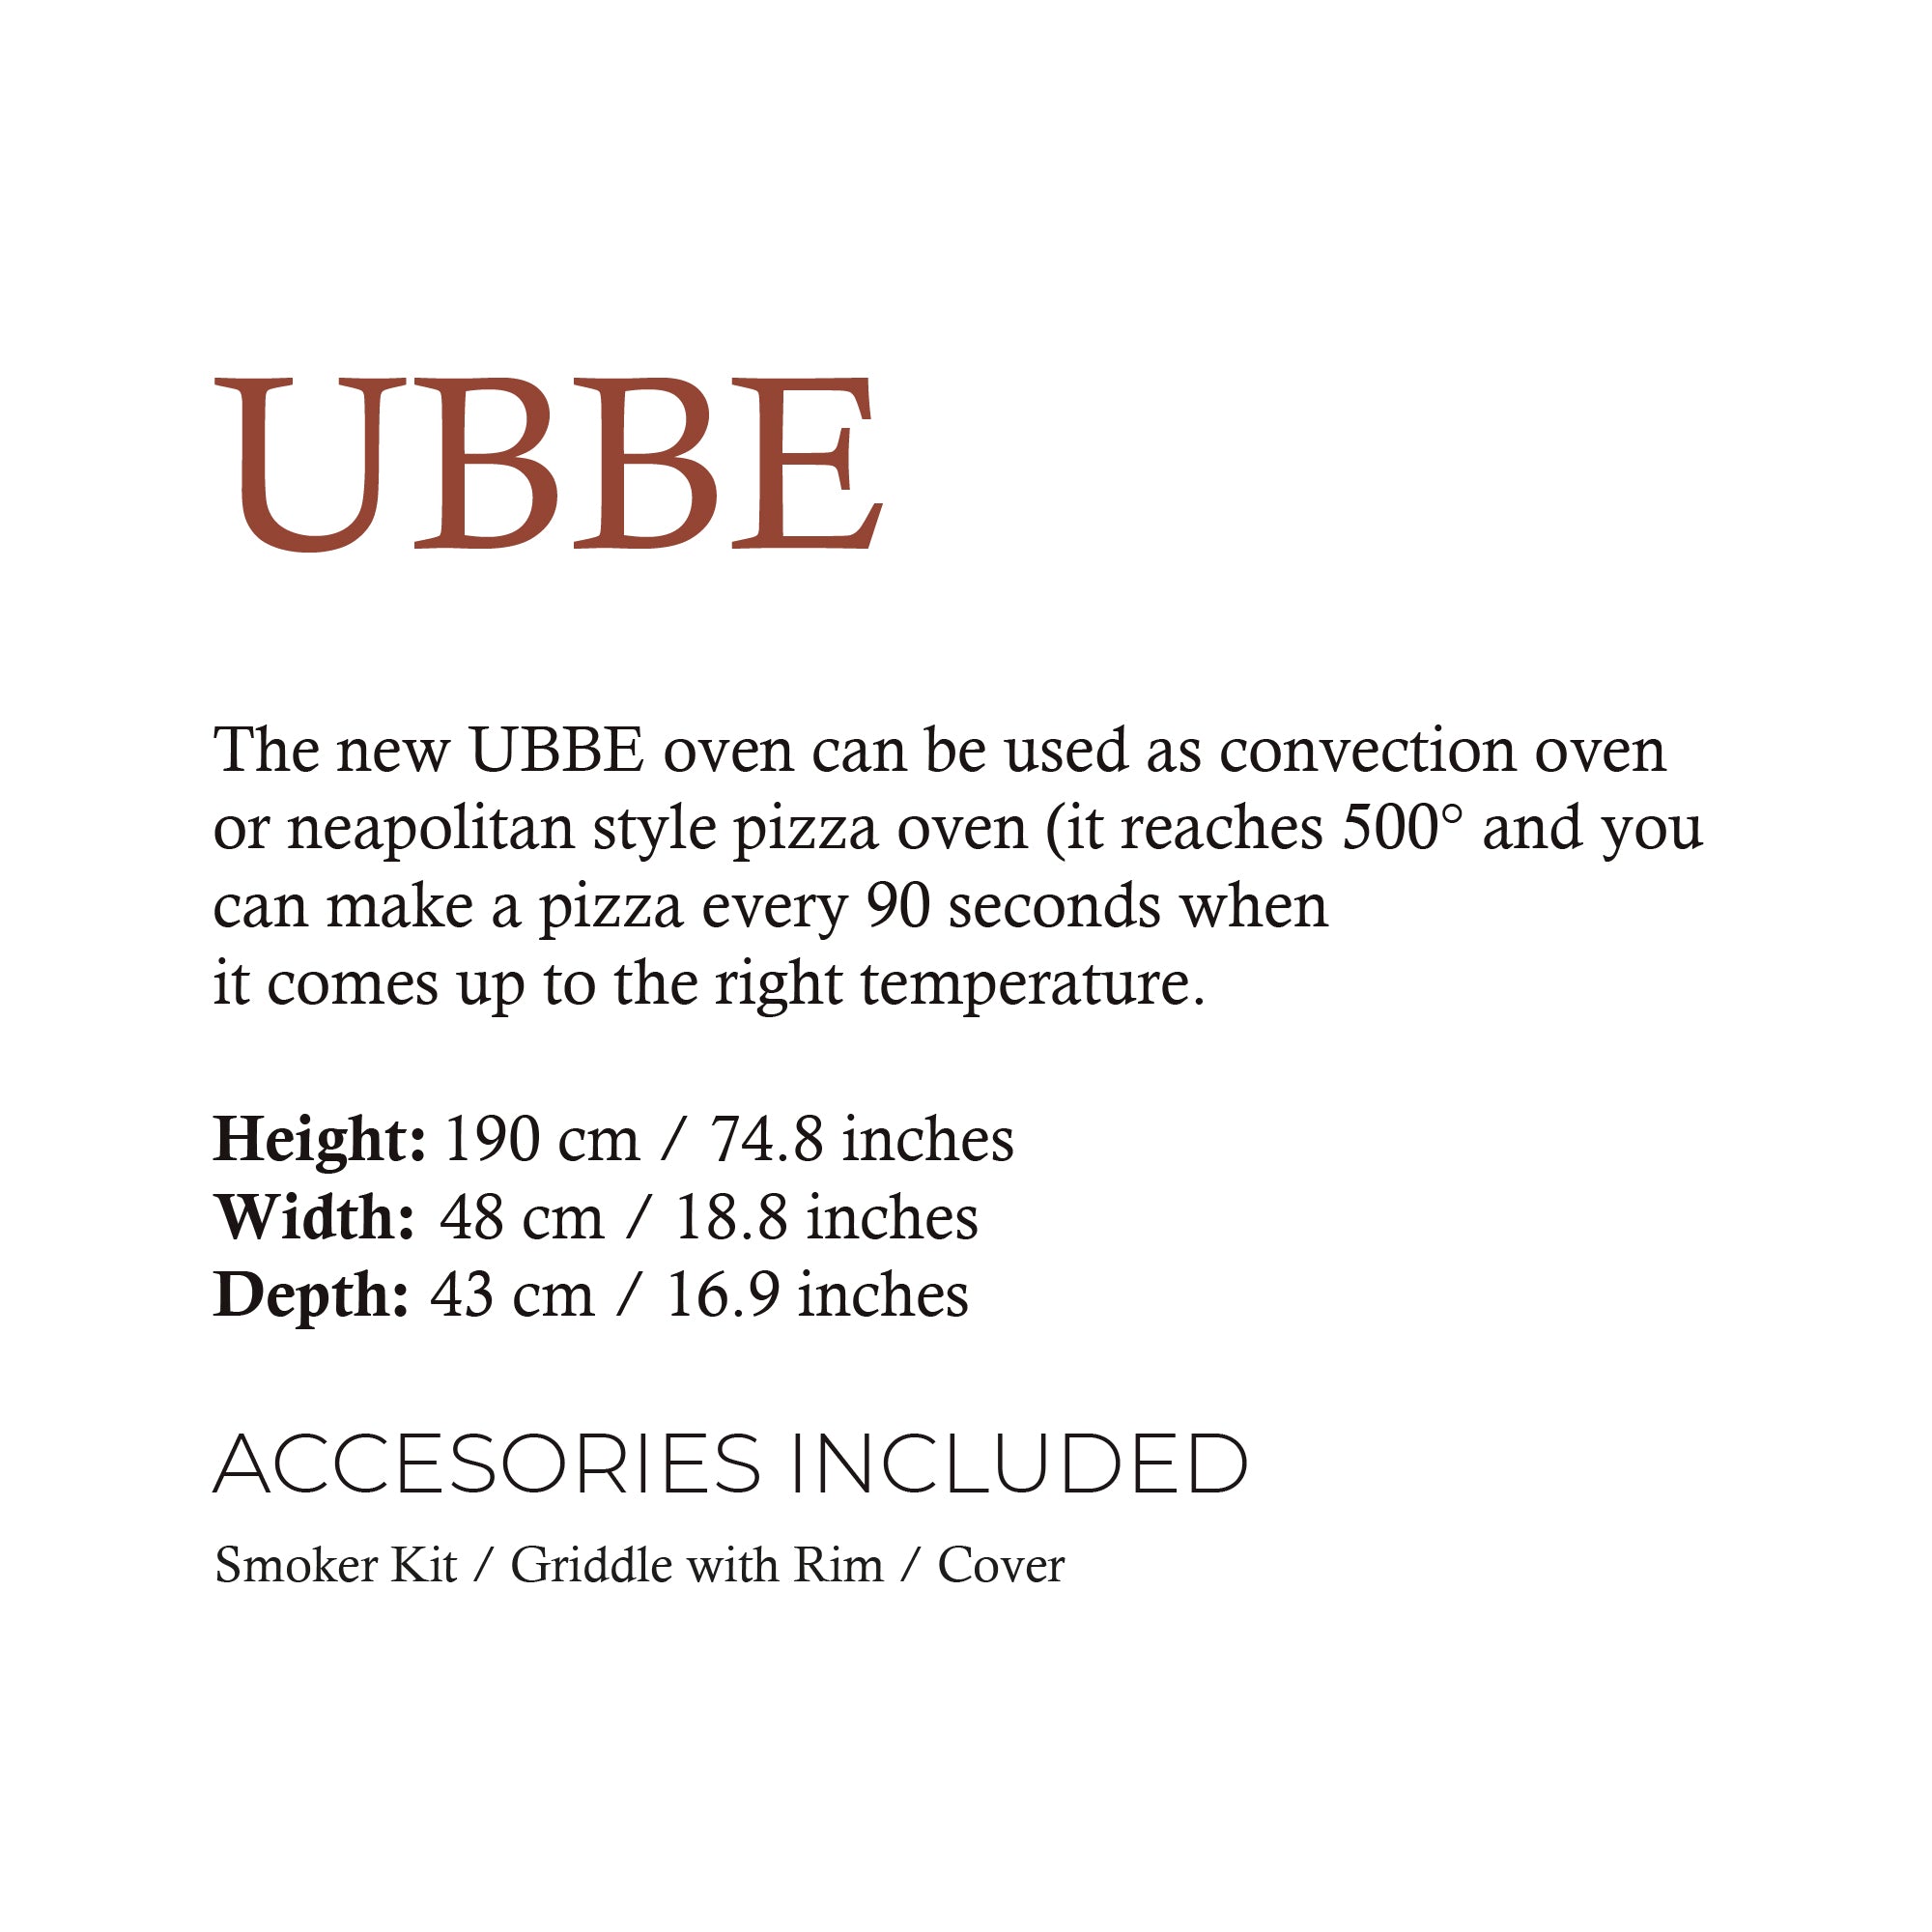 UBBE